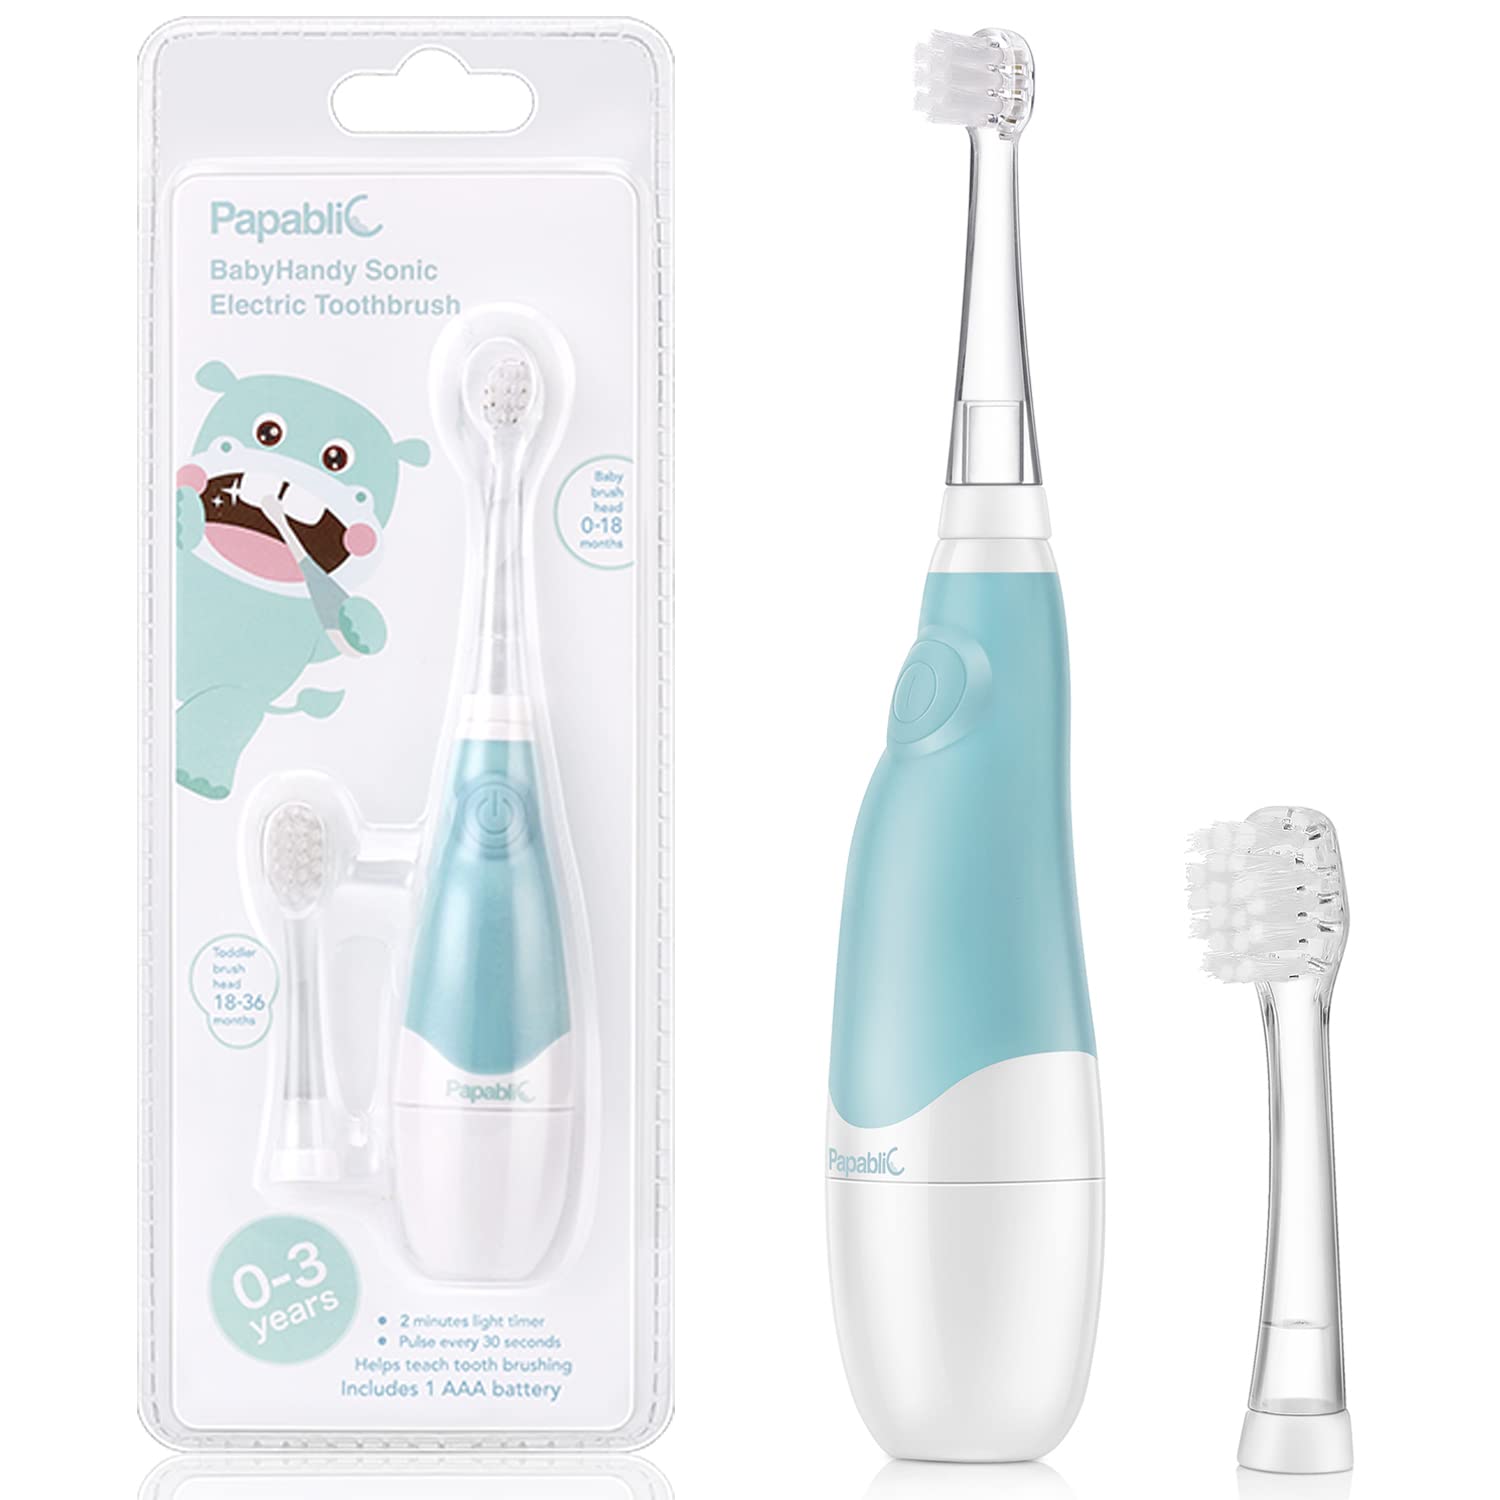 Book Cover Papablic BabyHandy 2-Stage Sonic Electric Toothbrush for Babies and Toddlers Ages 0-3 Years Mint Blue